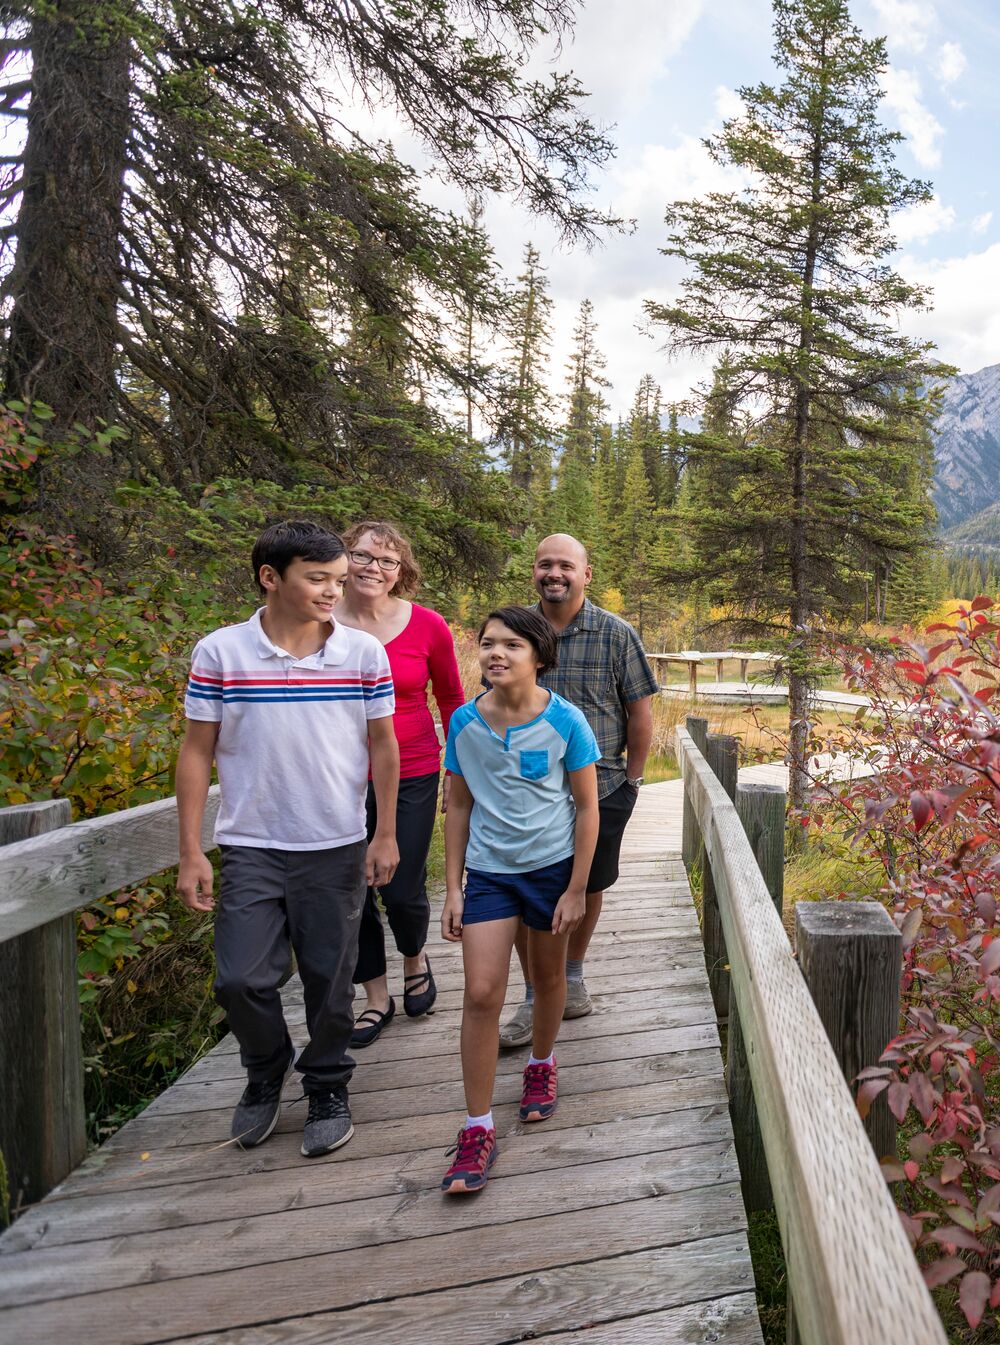 A family walks on the boardwalk at the Cave and Basin in Banff National Park.